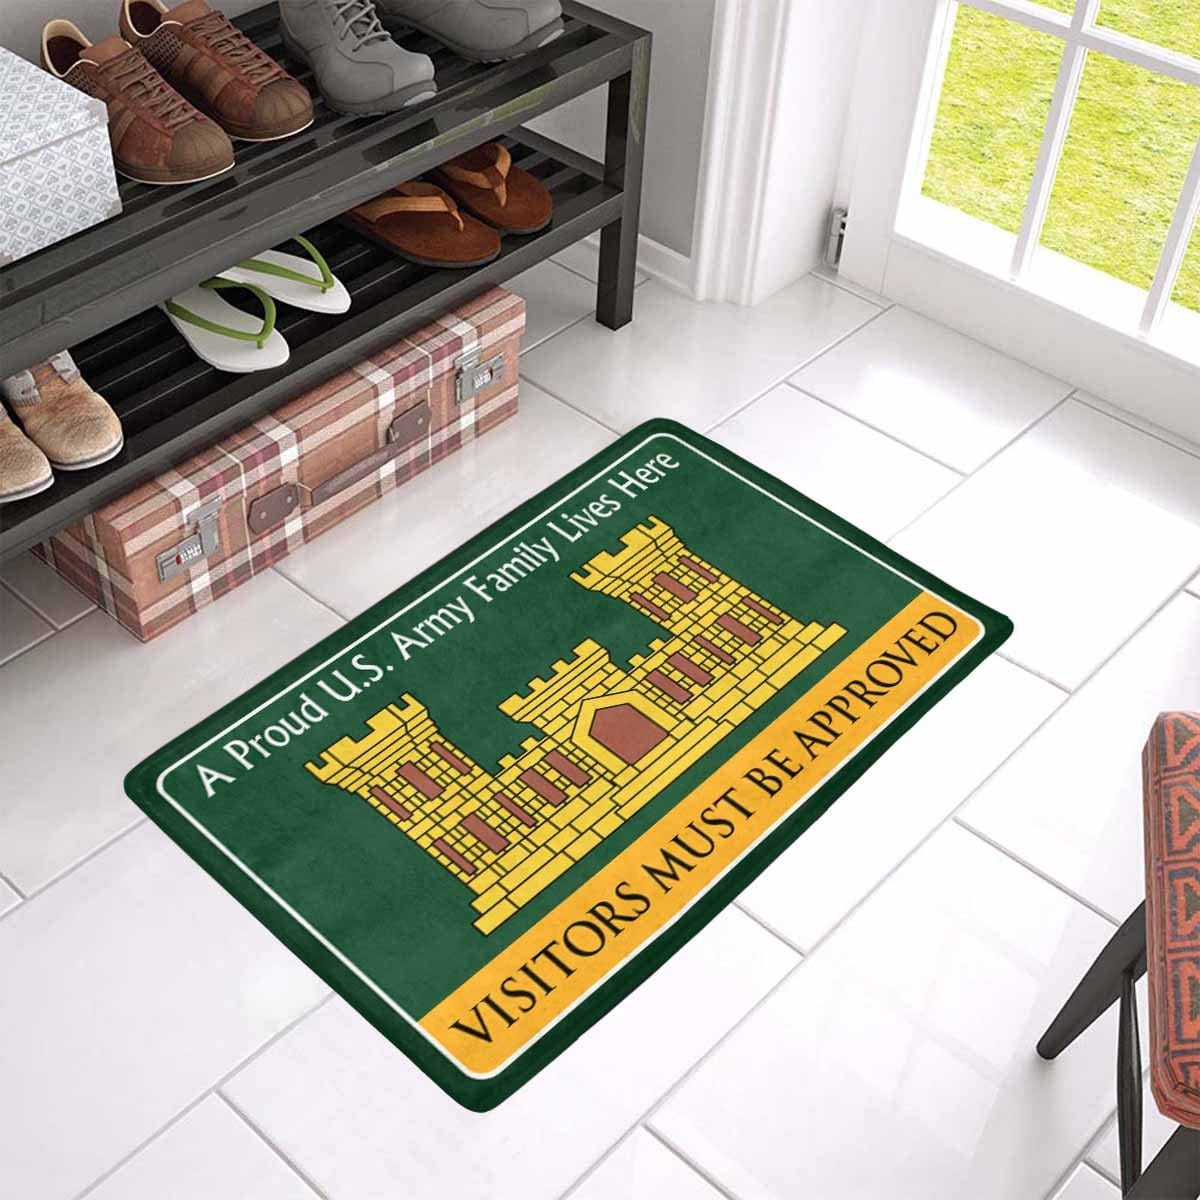 U.S. Army Corps of Engineers Family Doormat - Visitors must be approved Doormat (23.6 inches x 15.7 inches)-Doormat-Army-Branch-Veterans Nation